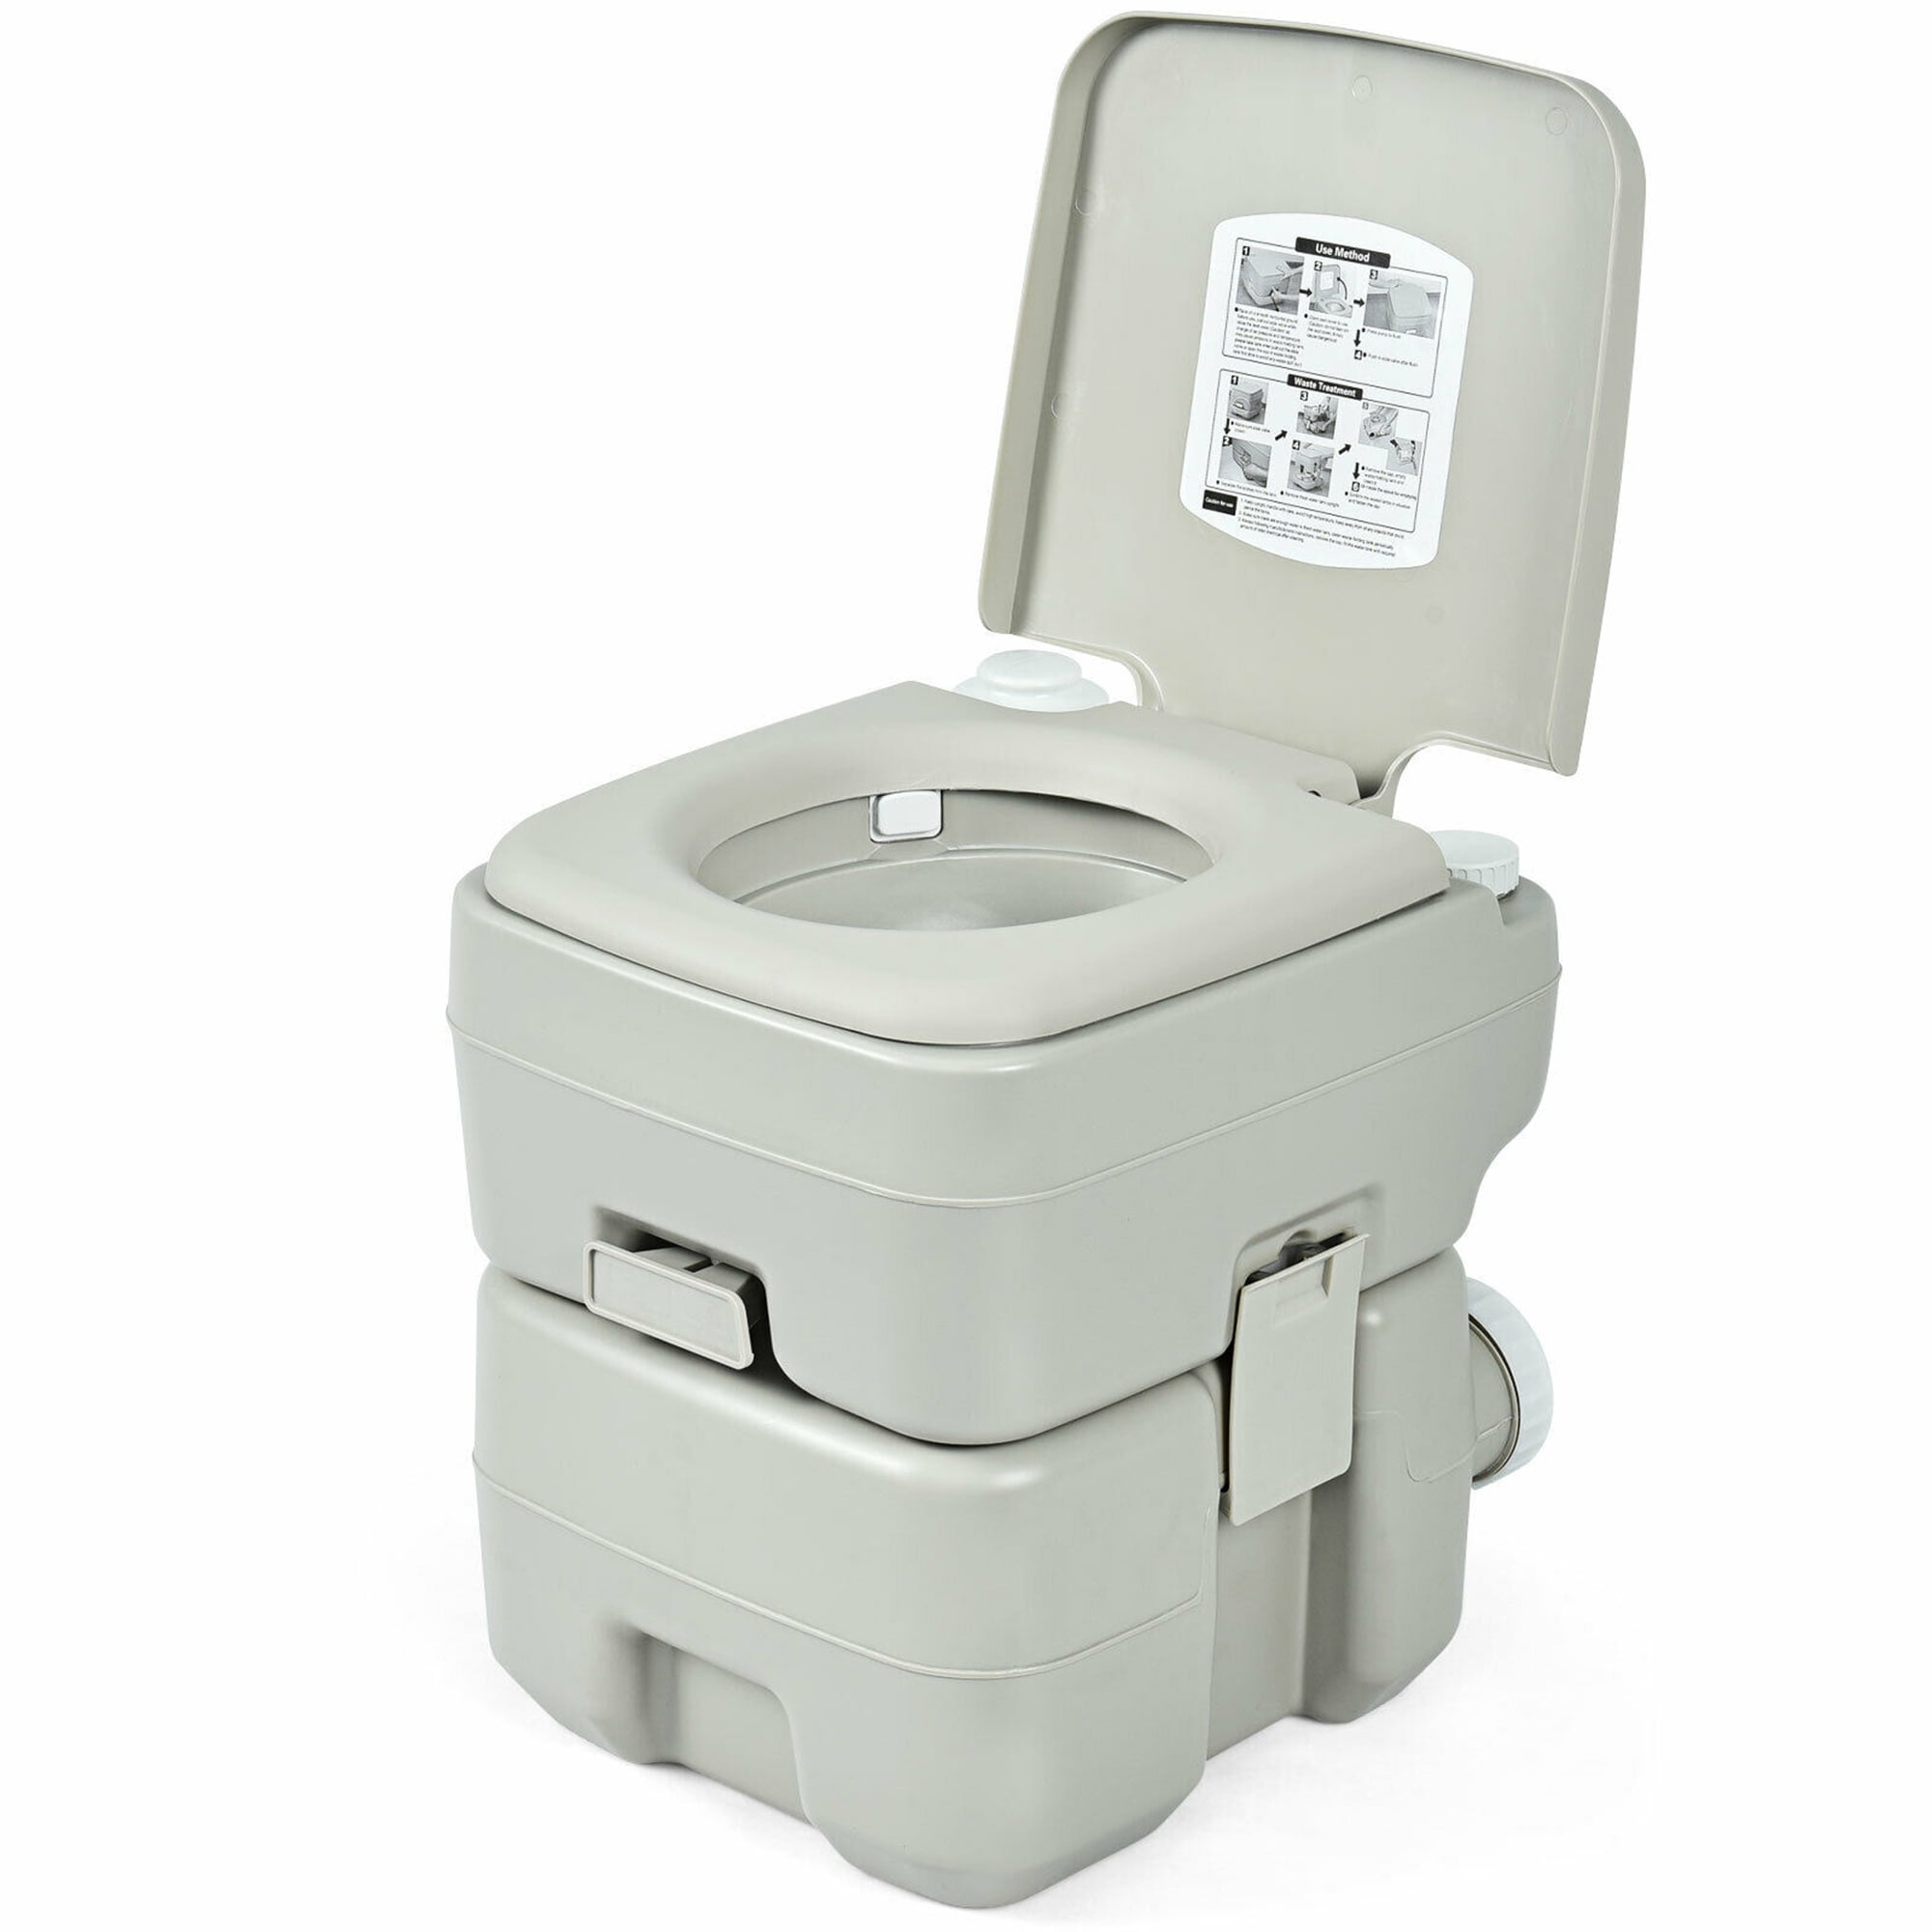 440lbs Heavy Duty Outdoor Toilet for Camping Fishing Boating Road-Trip GYMAX Portable Toilet 5.3 Gallon Outdoor Porta Potti Travel RV Toilet with Level Indicator 